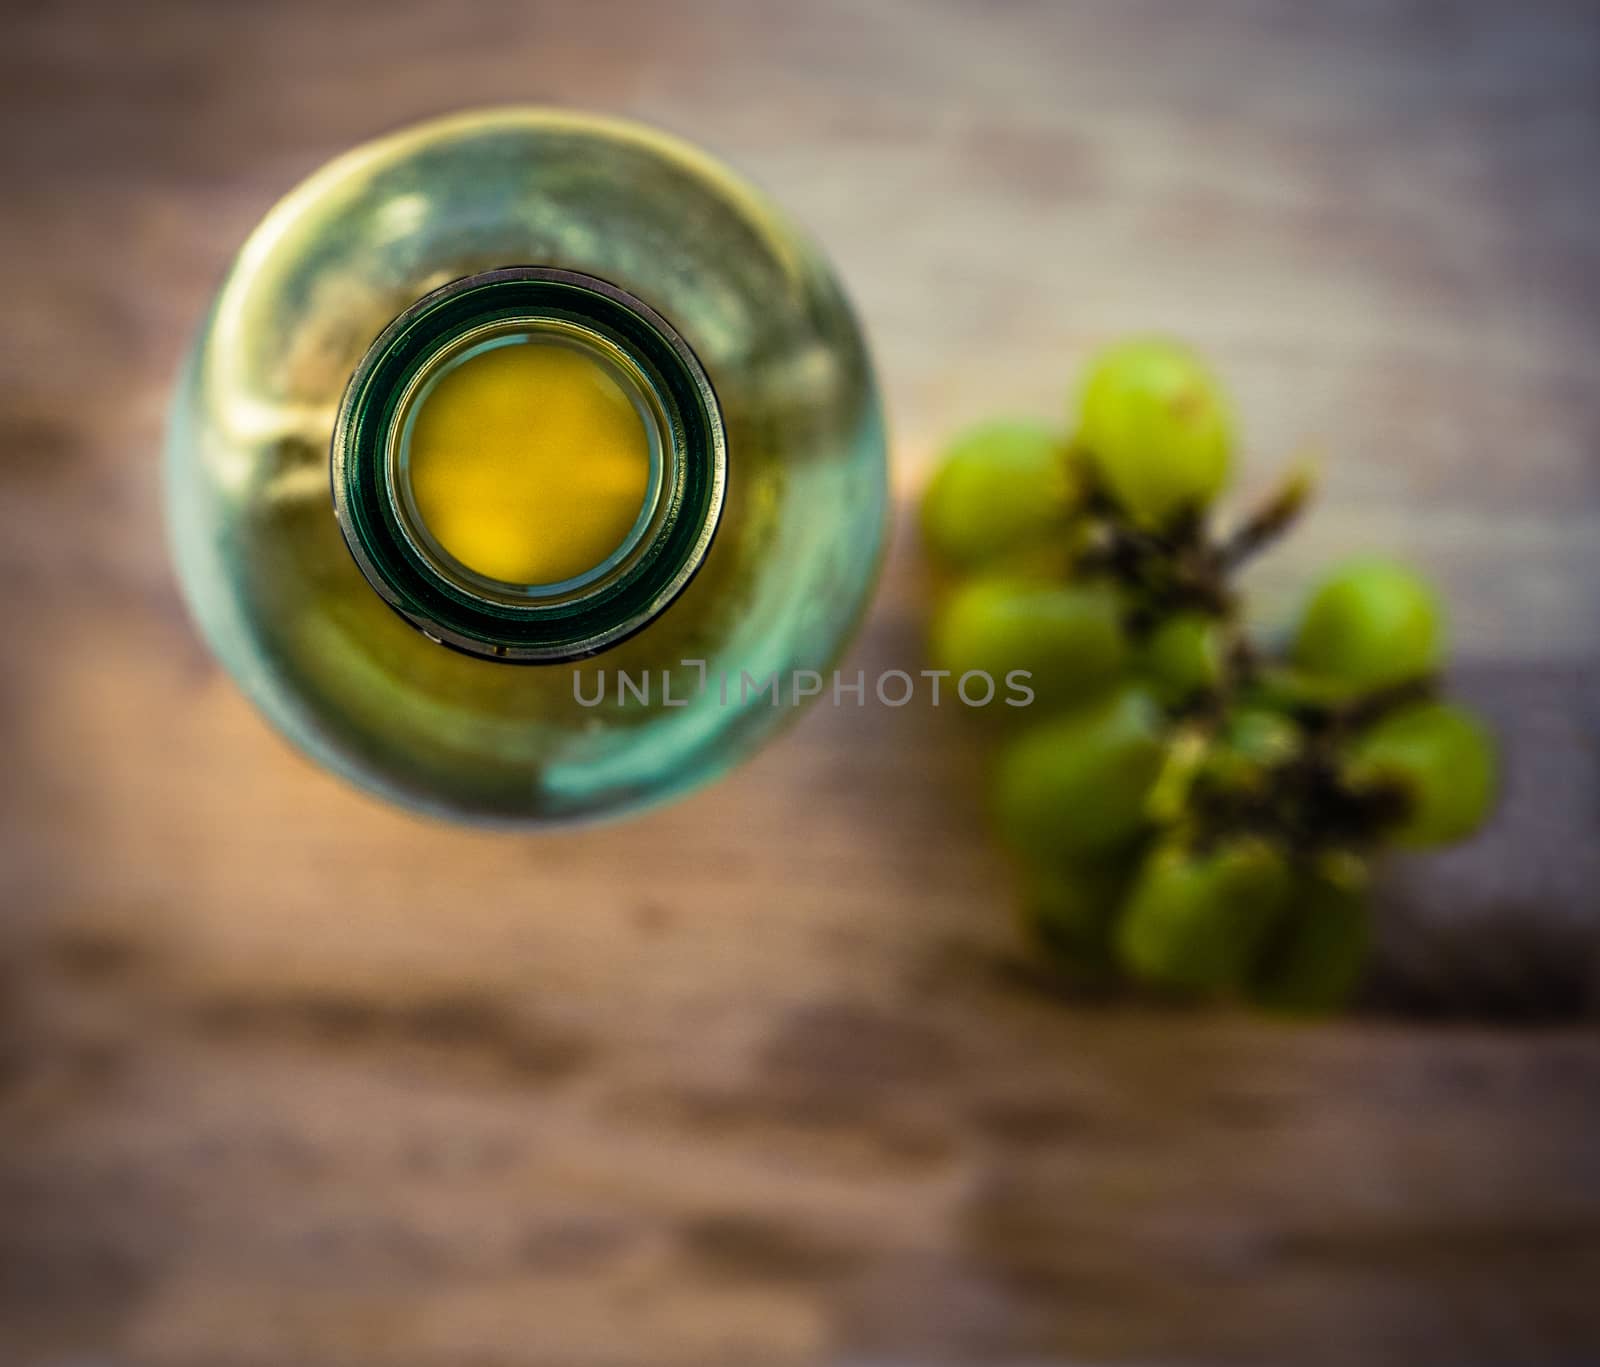 Retro Style Image Of A Rustic Wooden Table With White Wine Bottle And Grapes